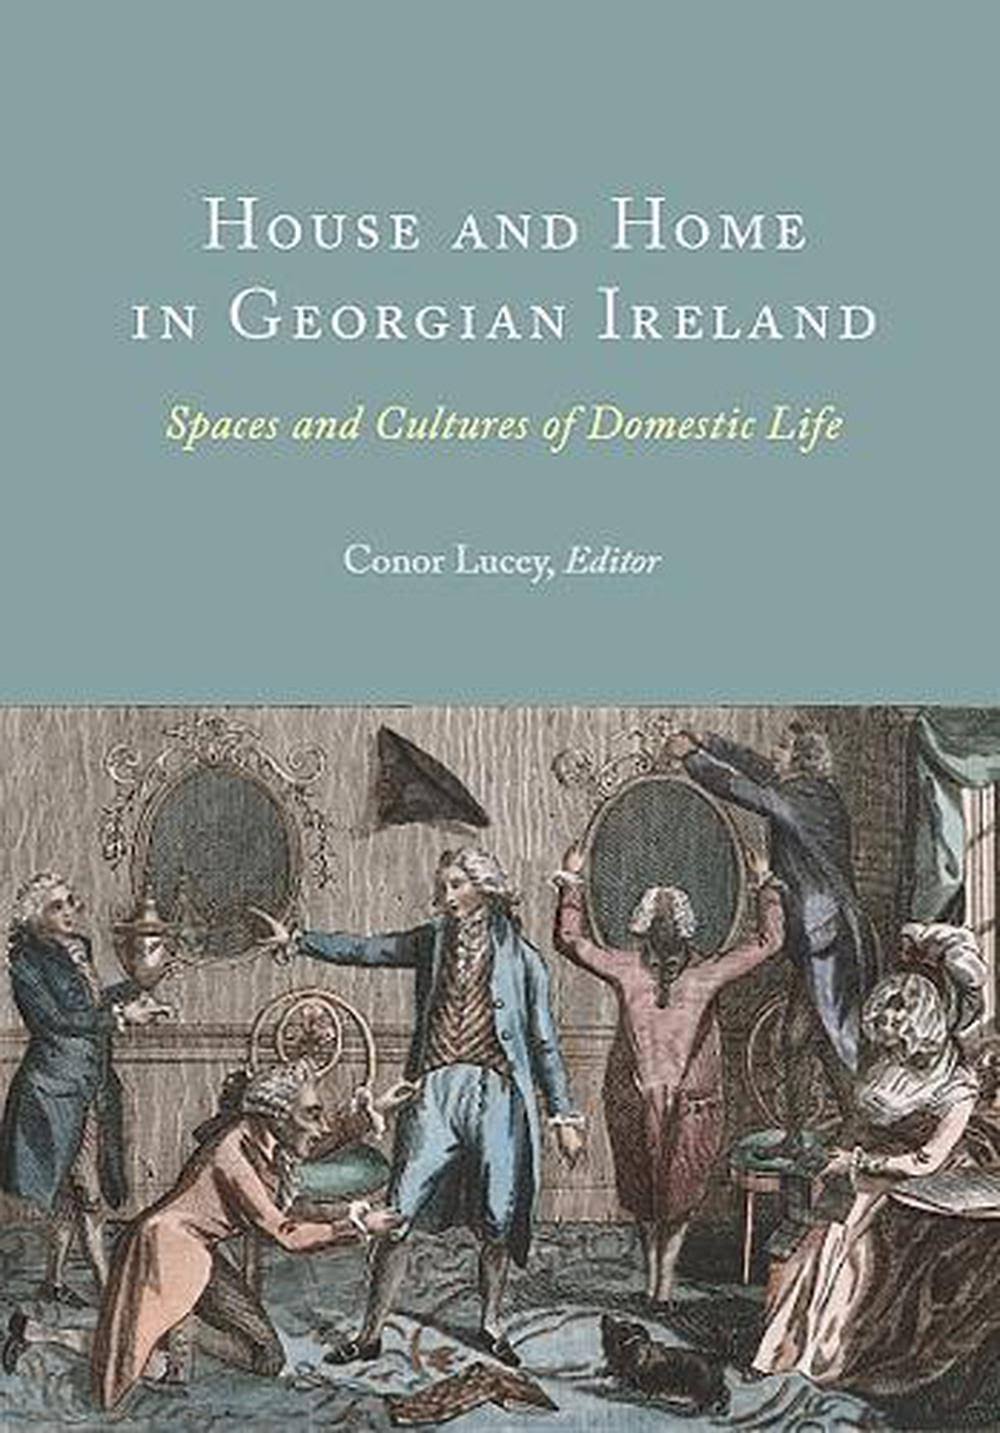 House and Home in Georgian Ireland by Conor Lucey